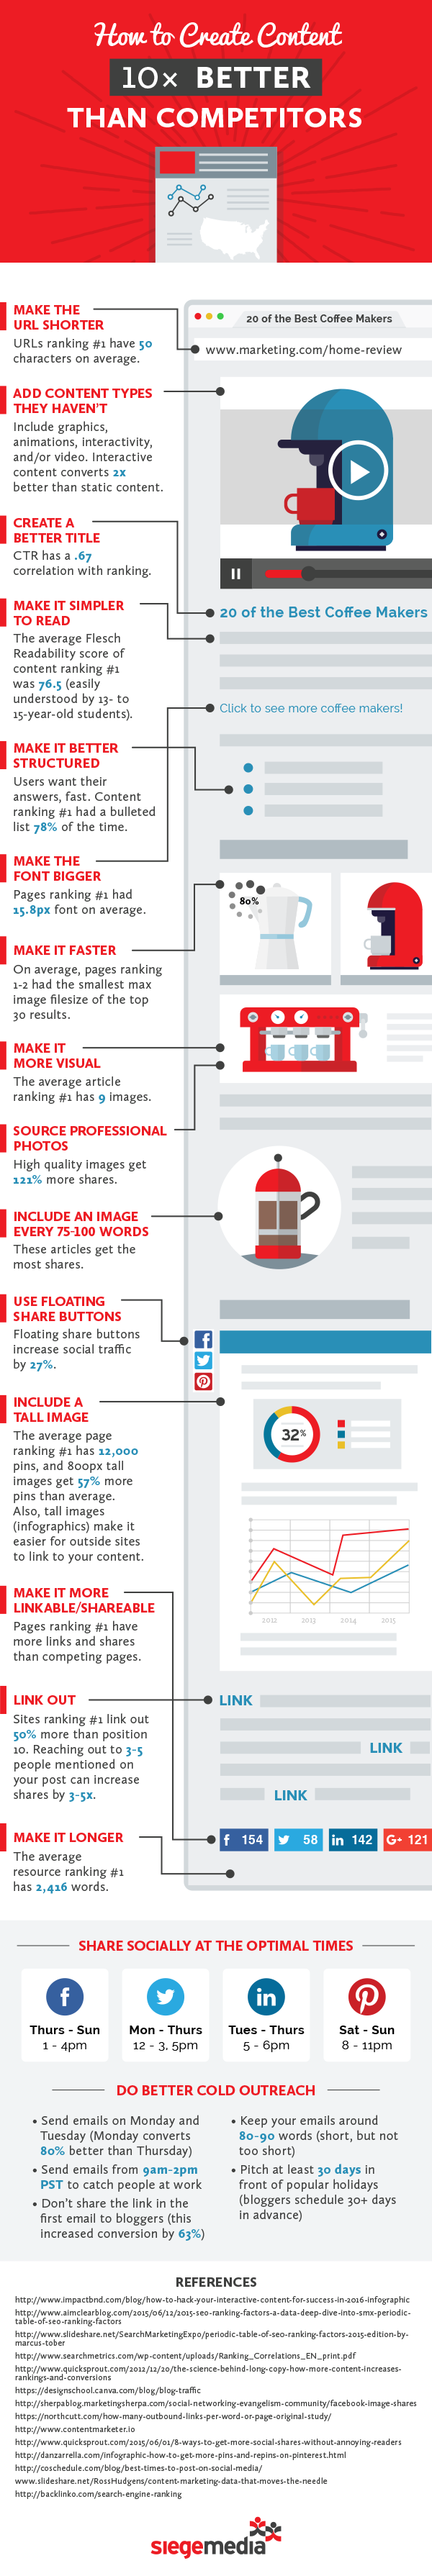 How to create content better than your competitors (Infographic)